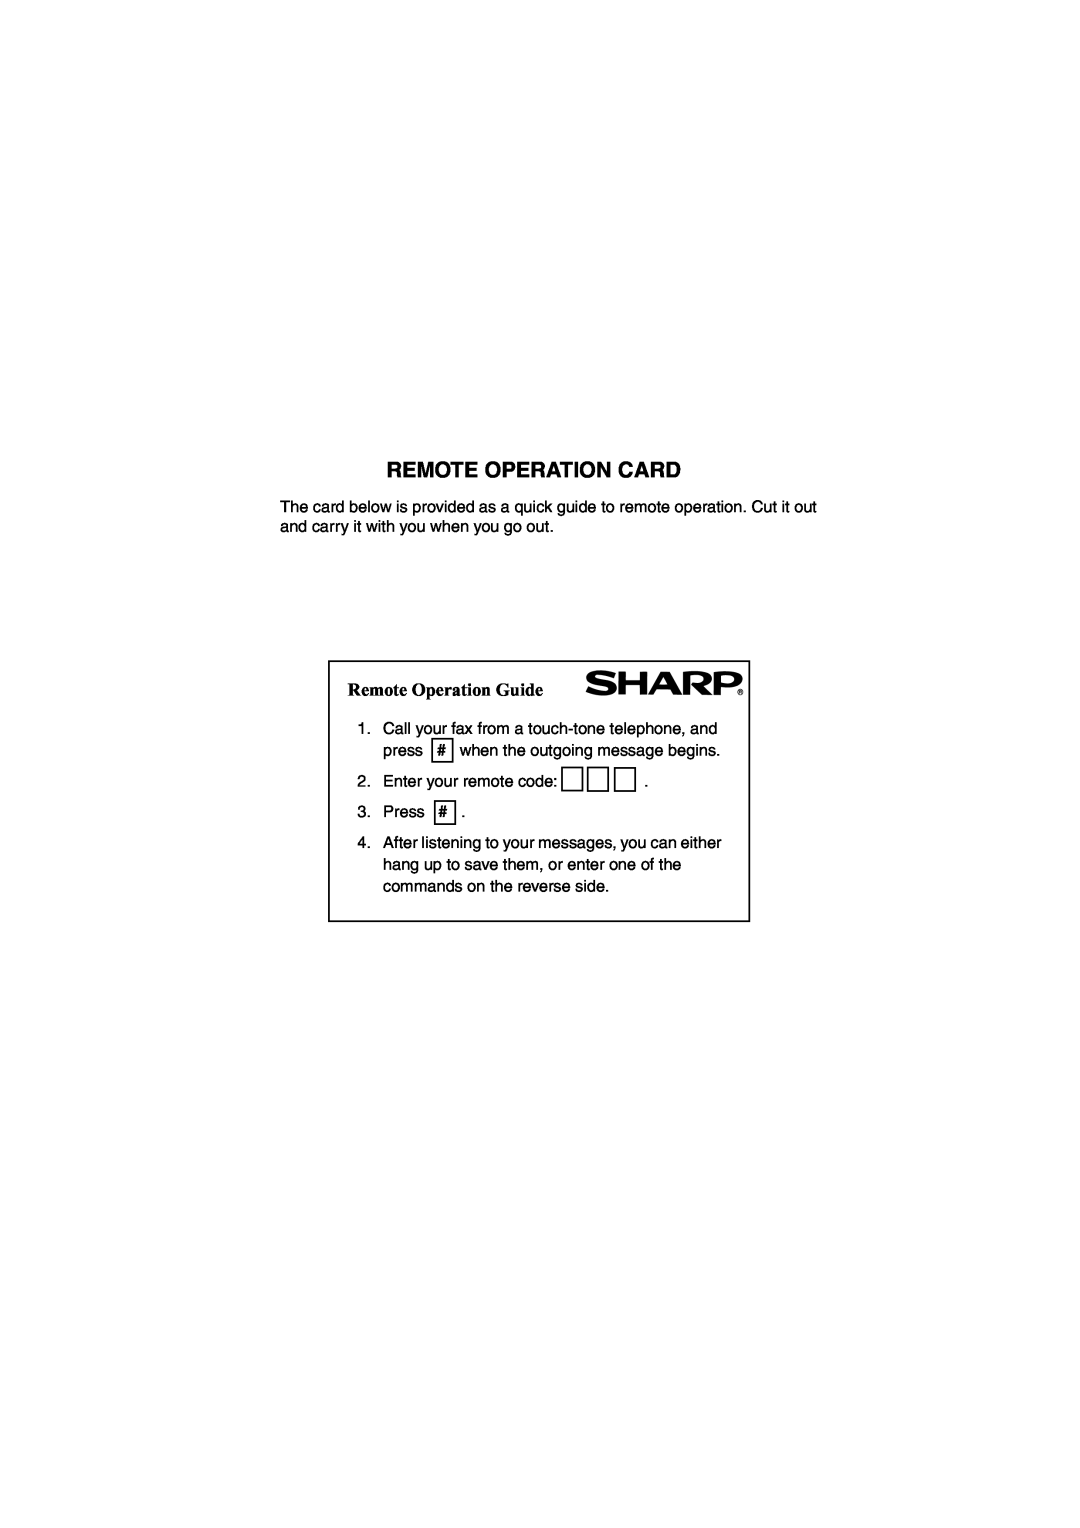 Sharp UX-A260 manual Remote Operation Card, Remote Operation Guide 